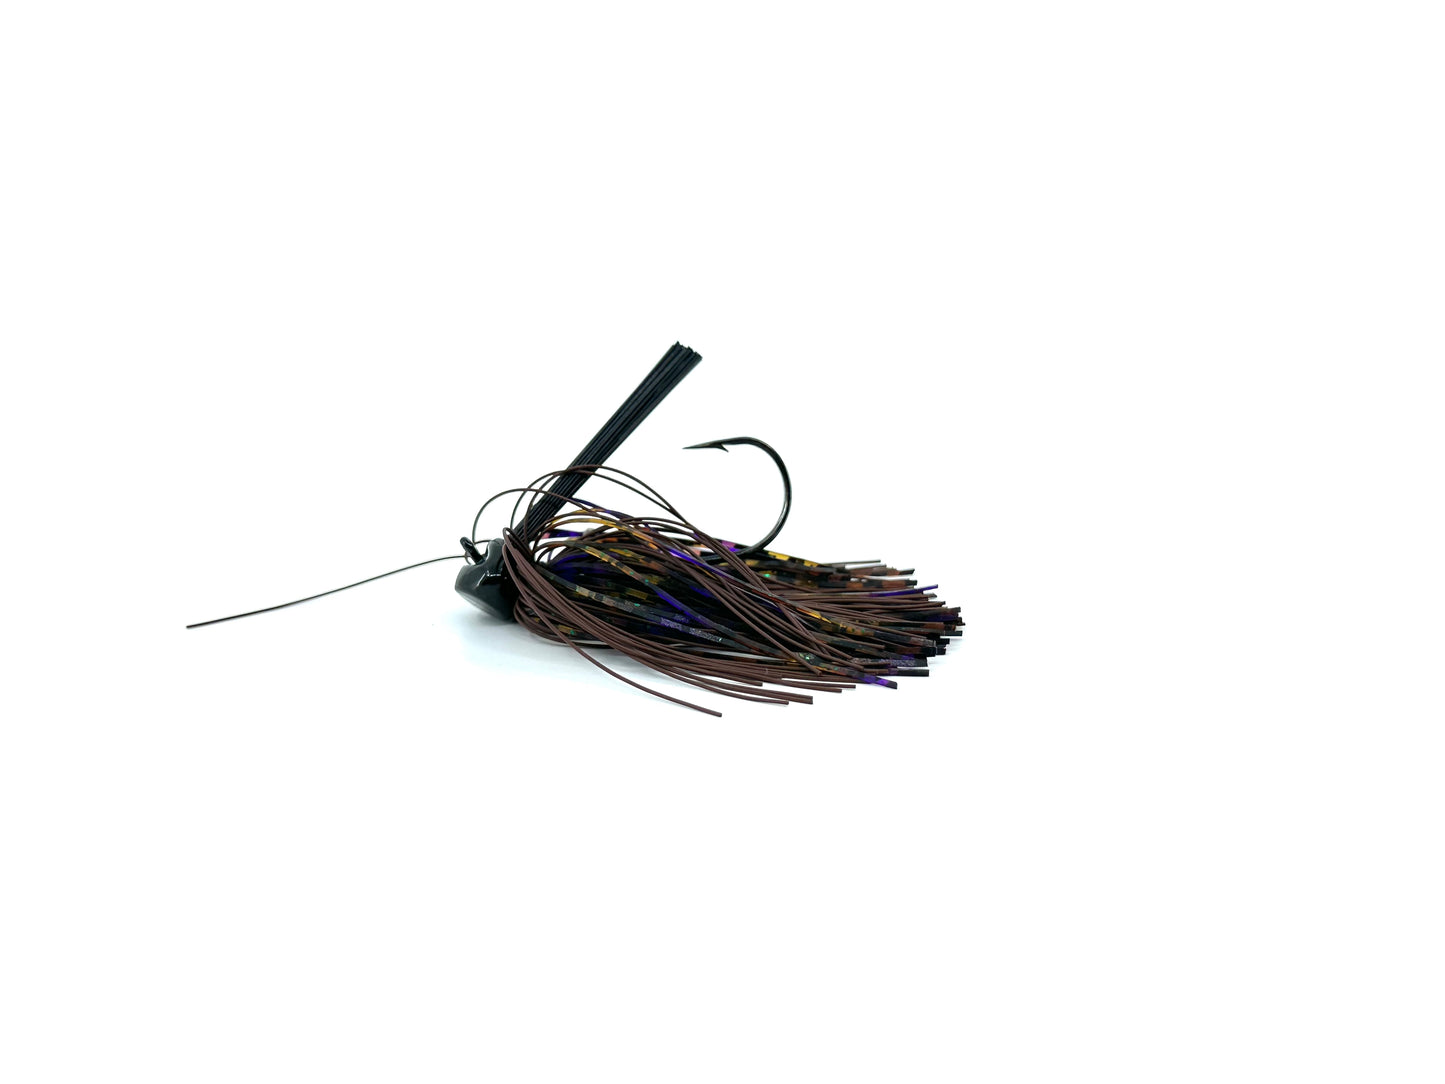 Mad Mouth Bass-Living Rubber Image Jig